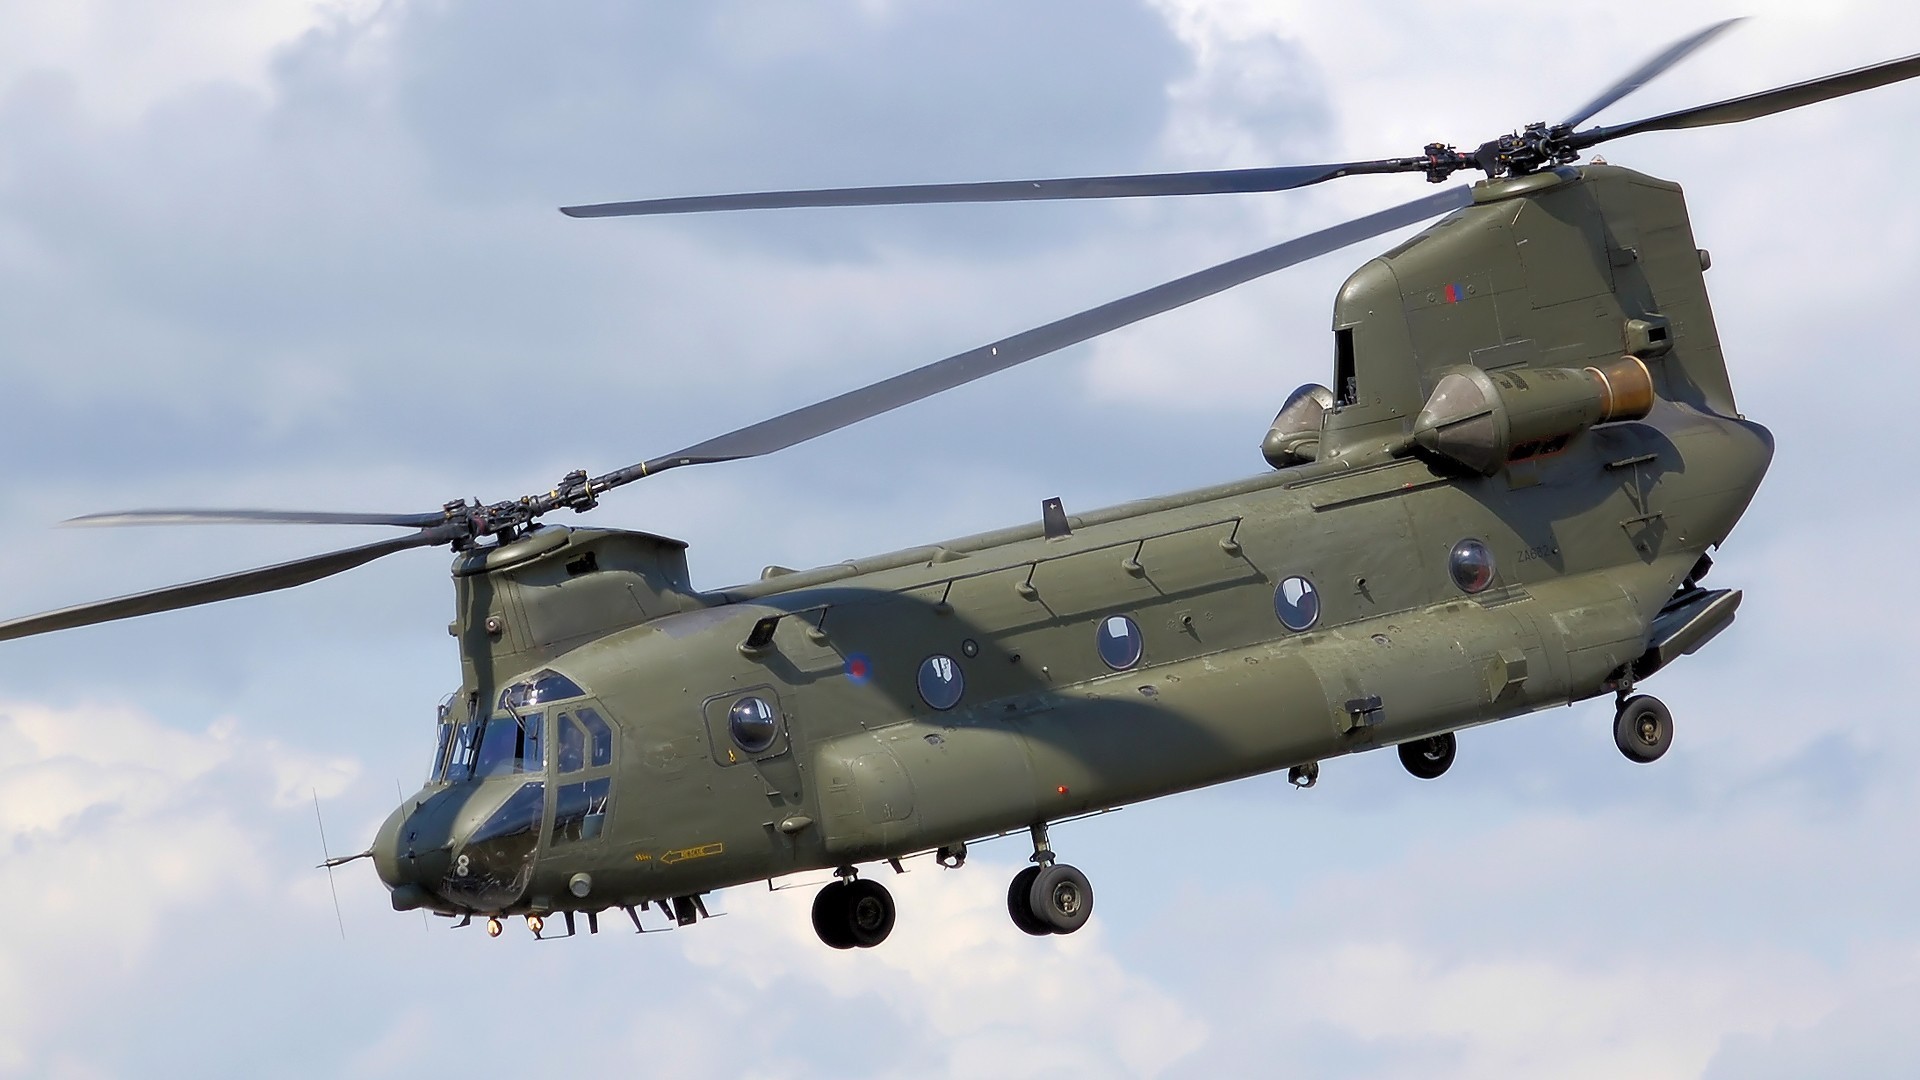 aircraft-ch-47-chinook-syncropter-1920x1080-wallpaper.jpg